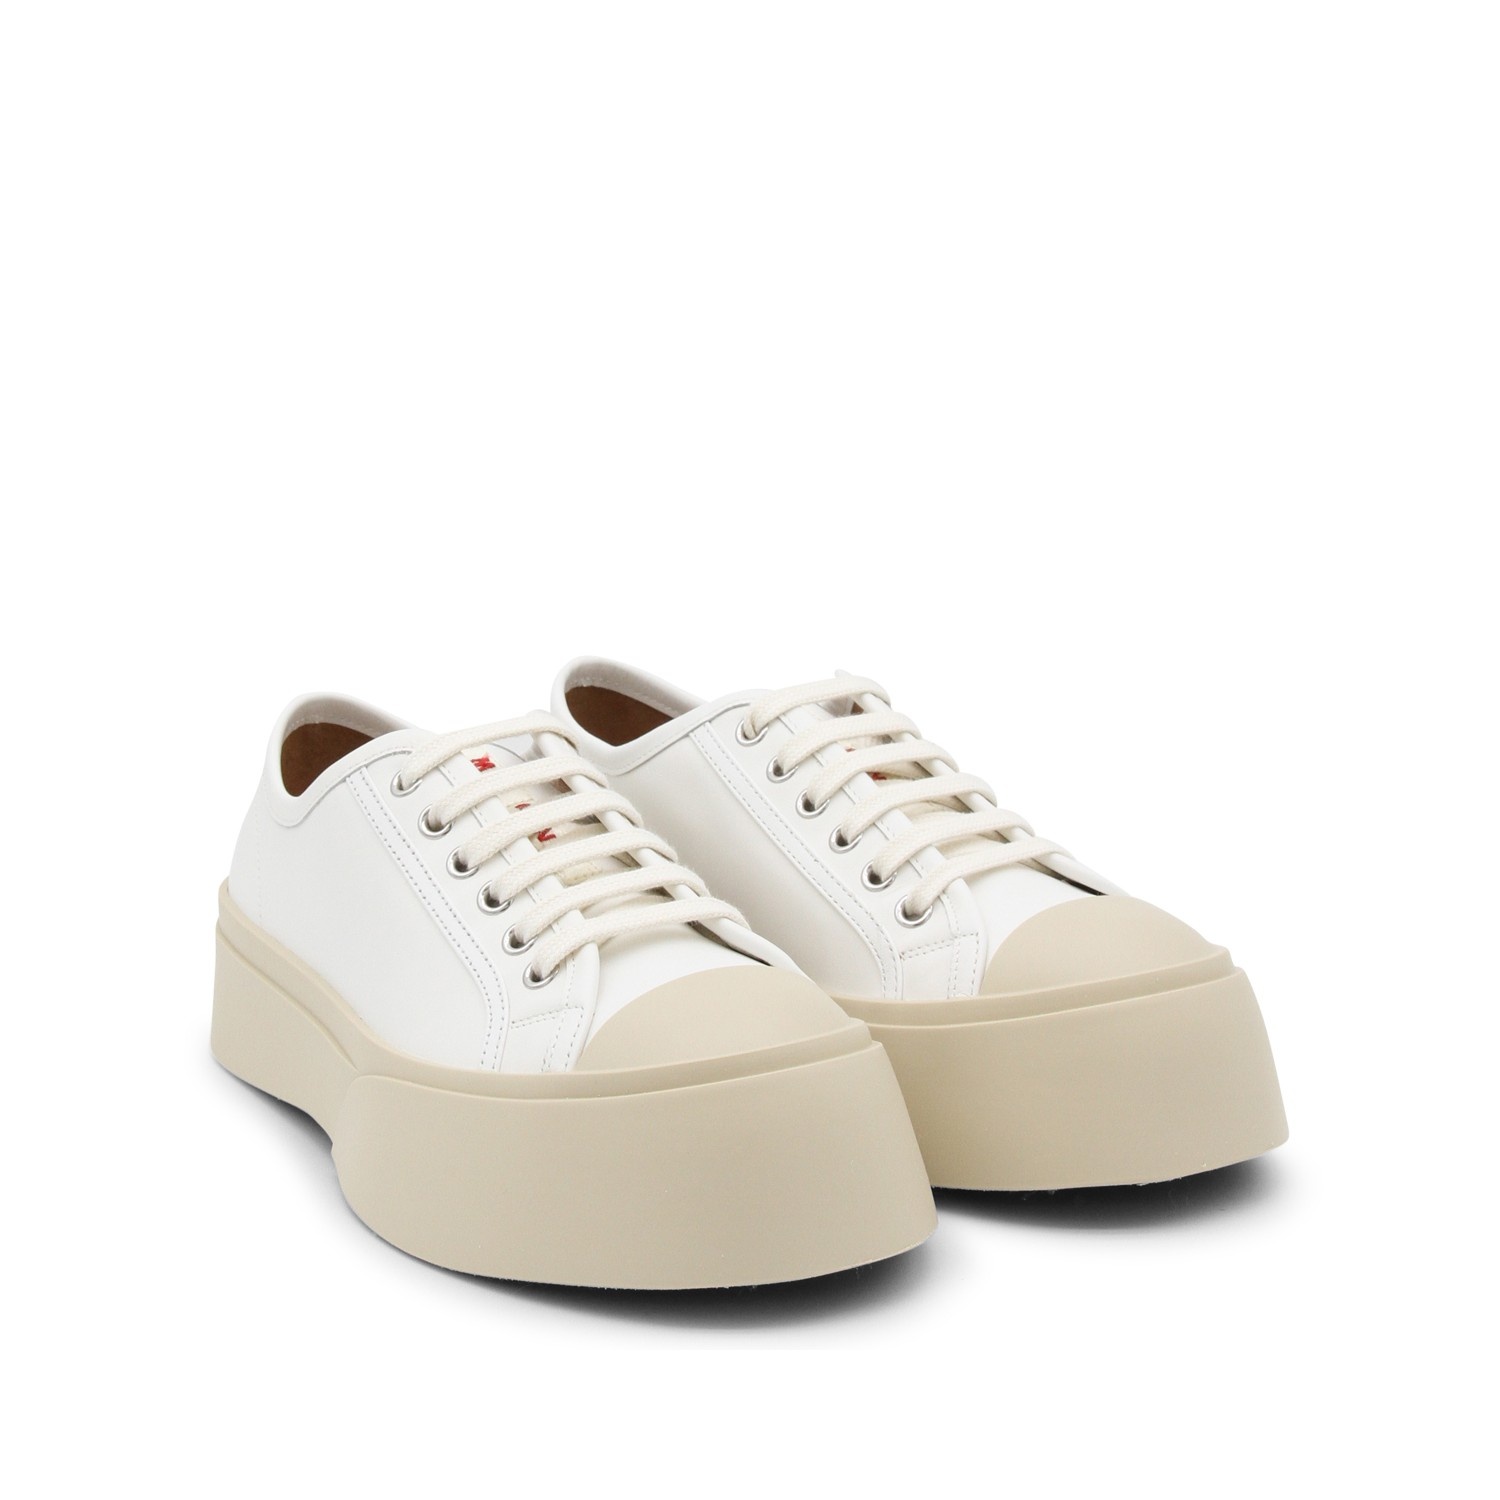 WHITE LEATHER PABLO SNEAKERS - 2